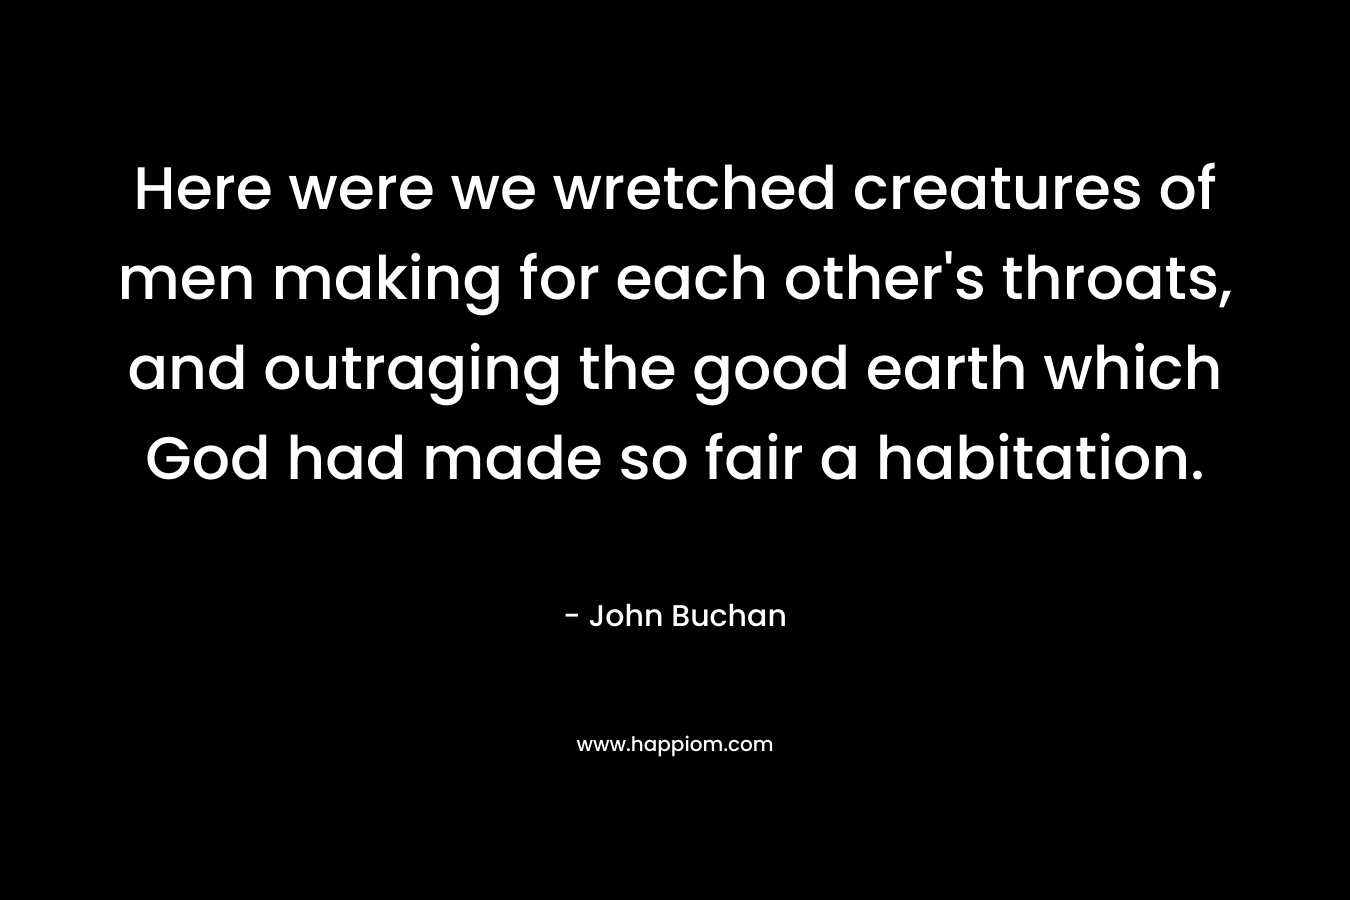 Here were we wretched creatures of men making for each other’s throats, and outraging the good earth which God had made so fair a habitation. – John Buchan